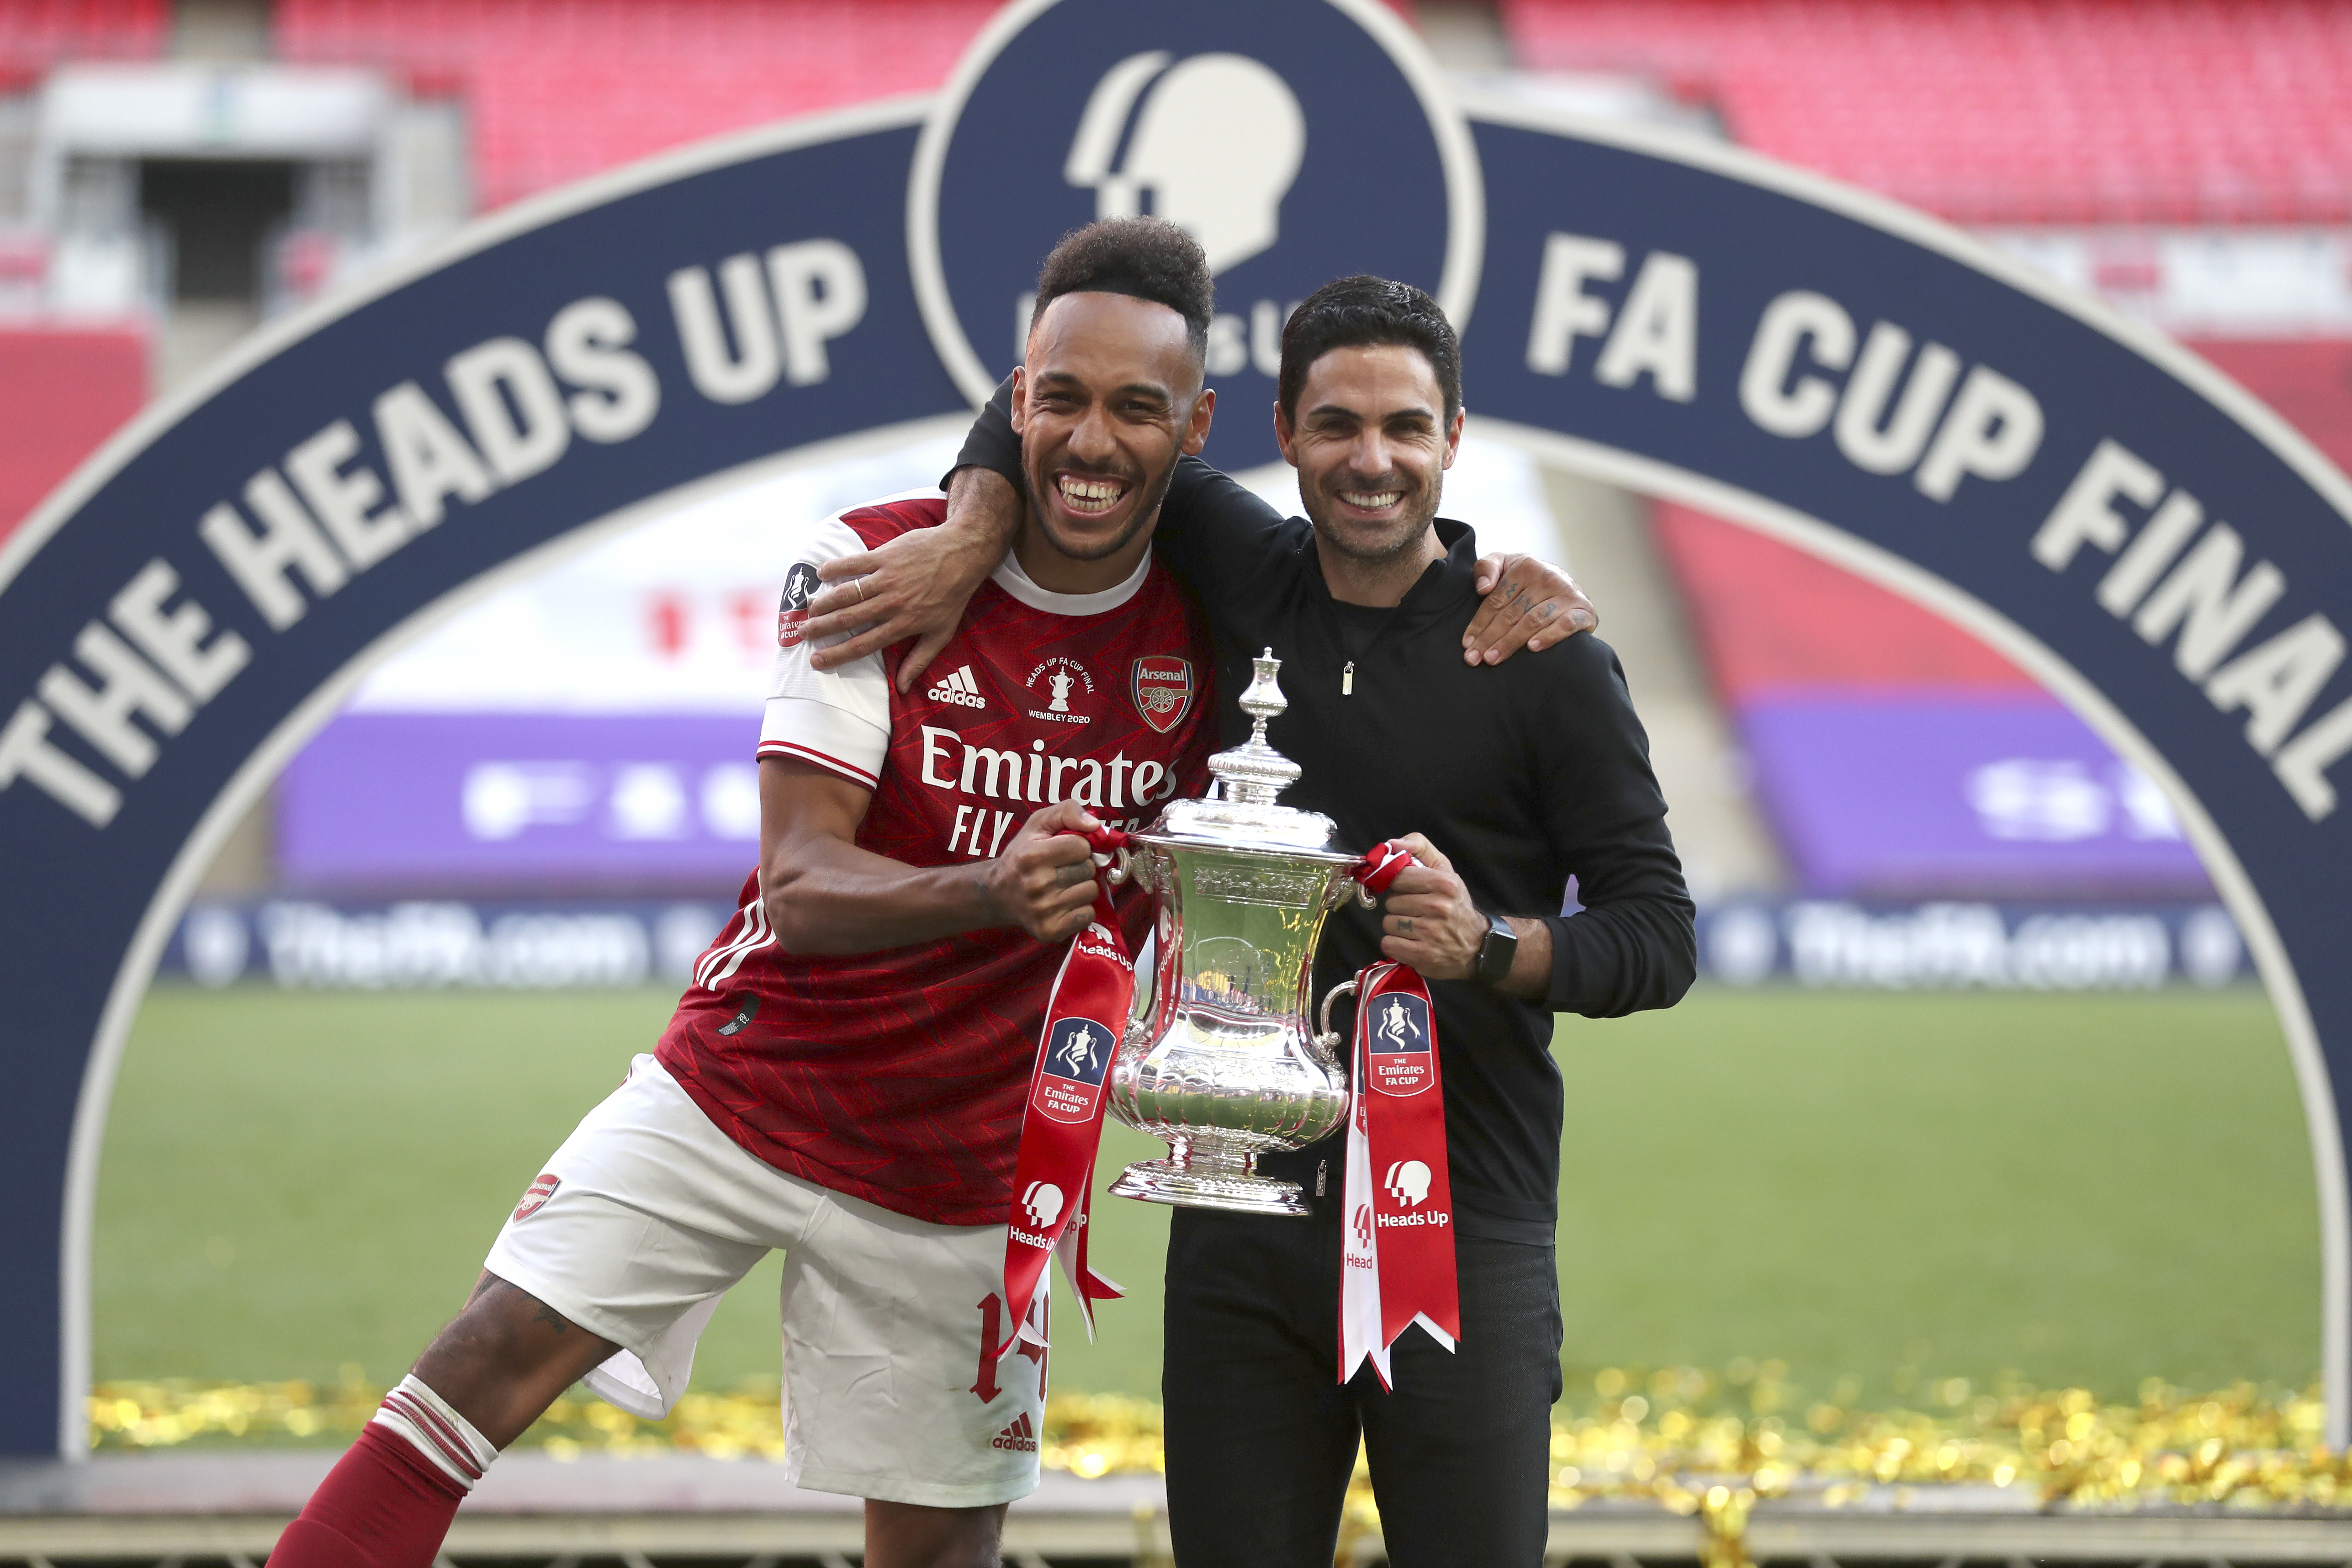 How to watch 2020 FA Community Shield online (8/29/20) Live stream for Arsenal vs